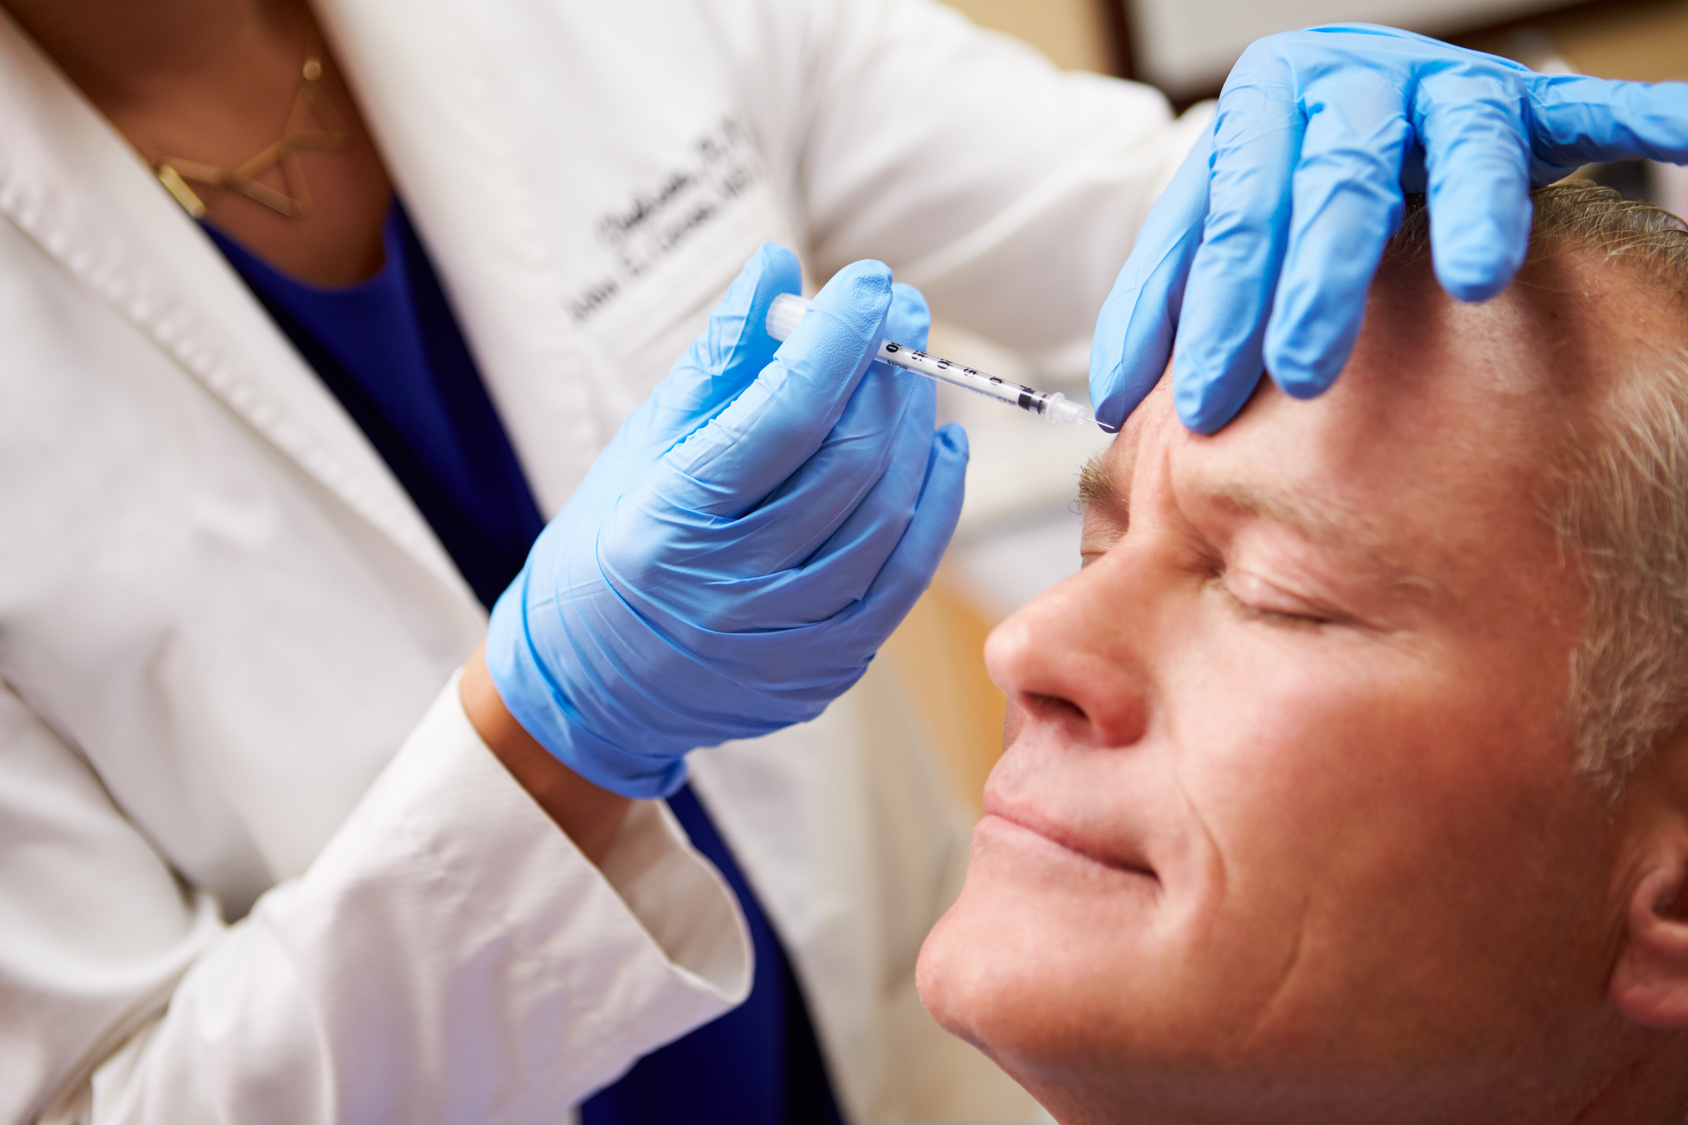 Botox shots little better than nerve stimulation for incontinence